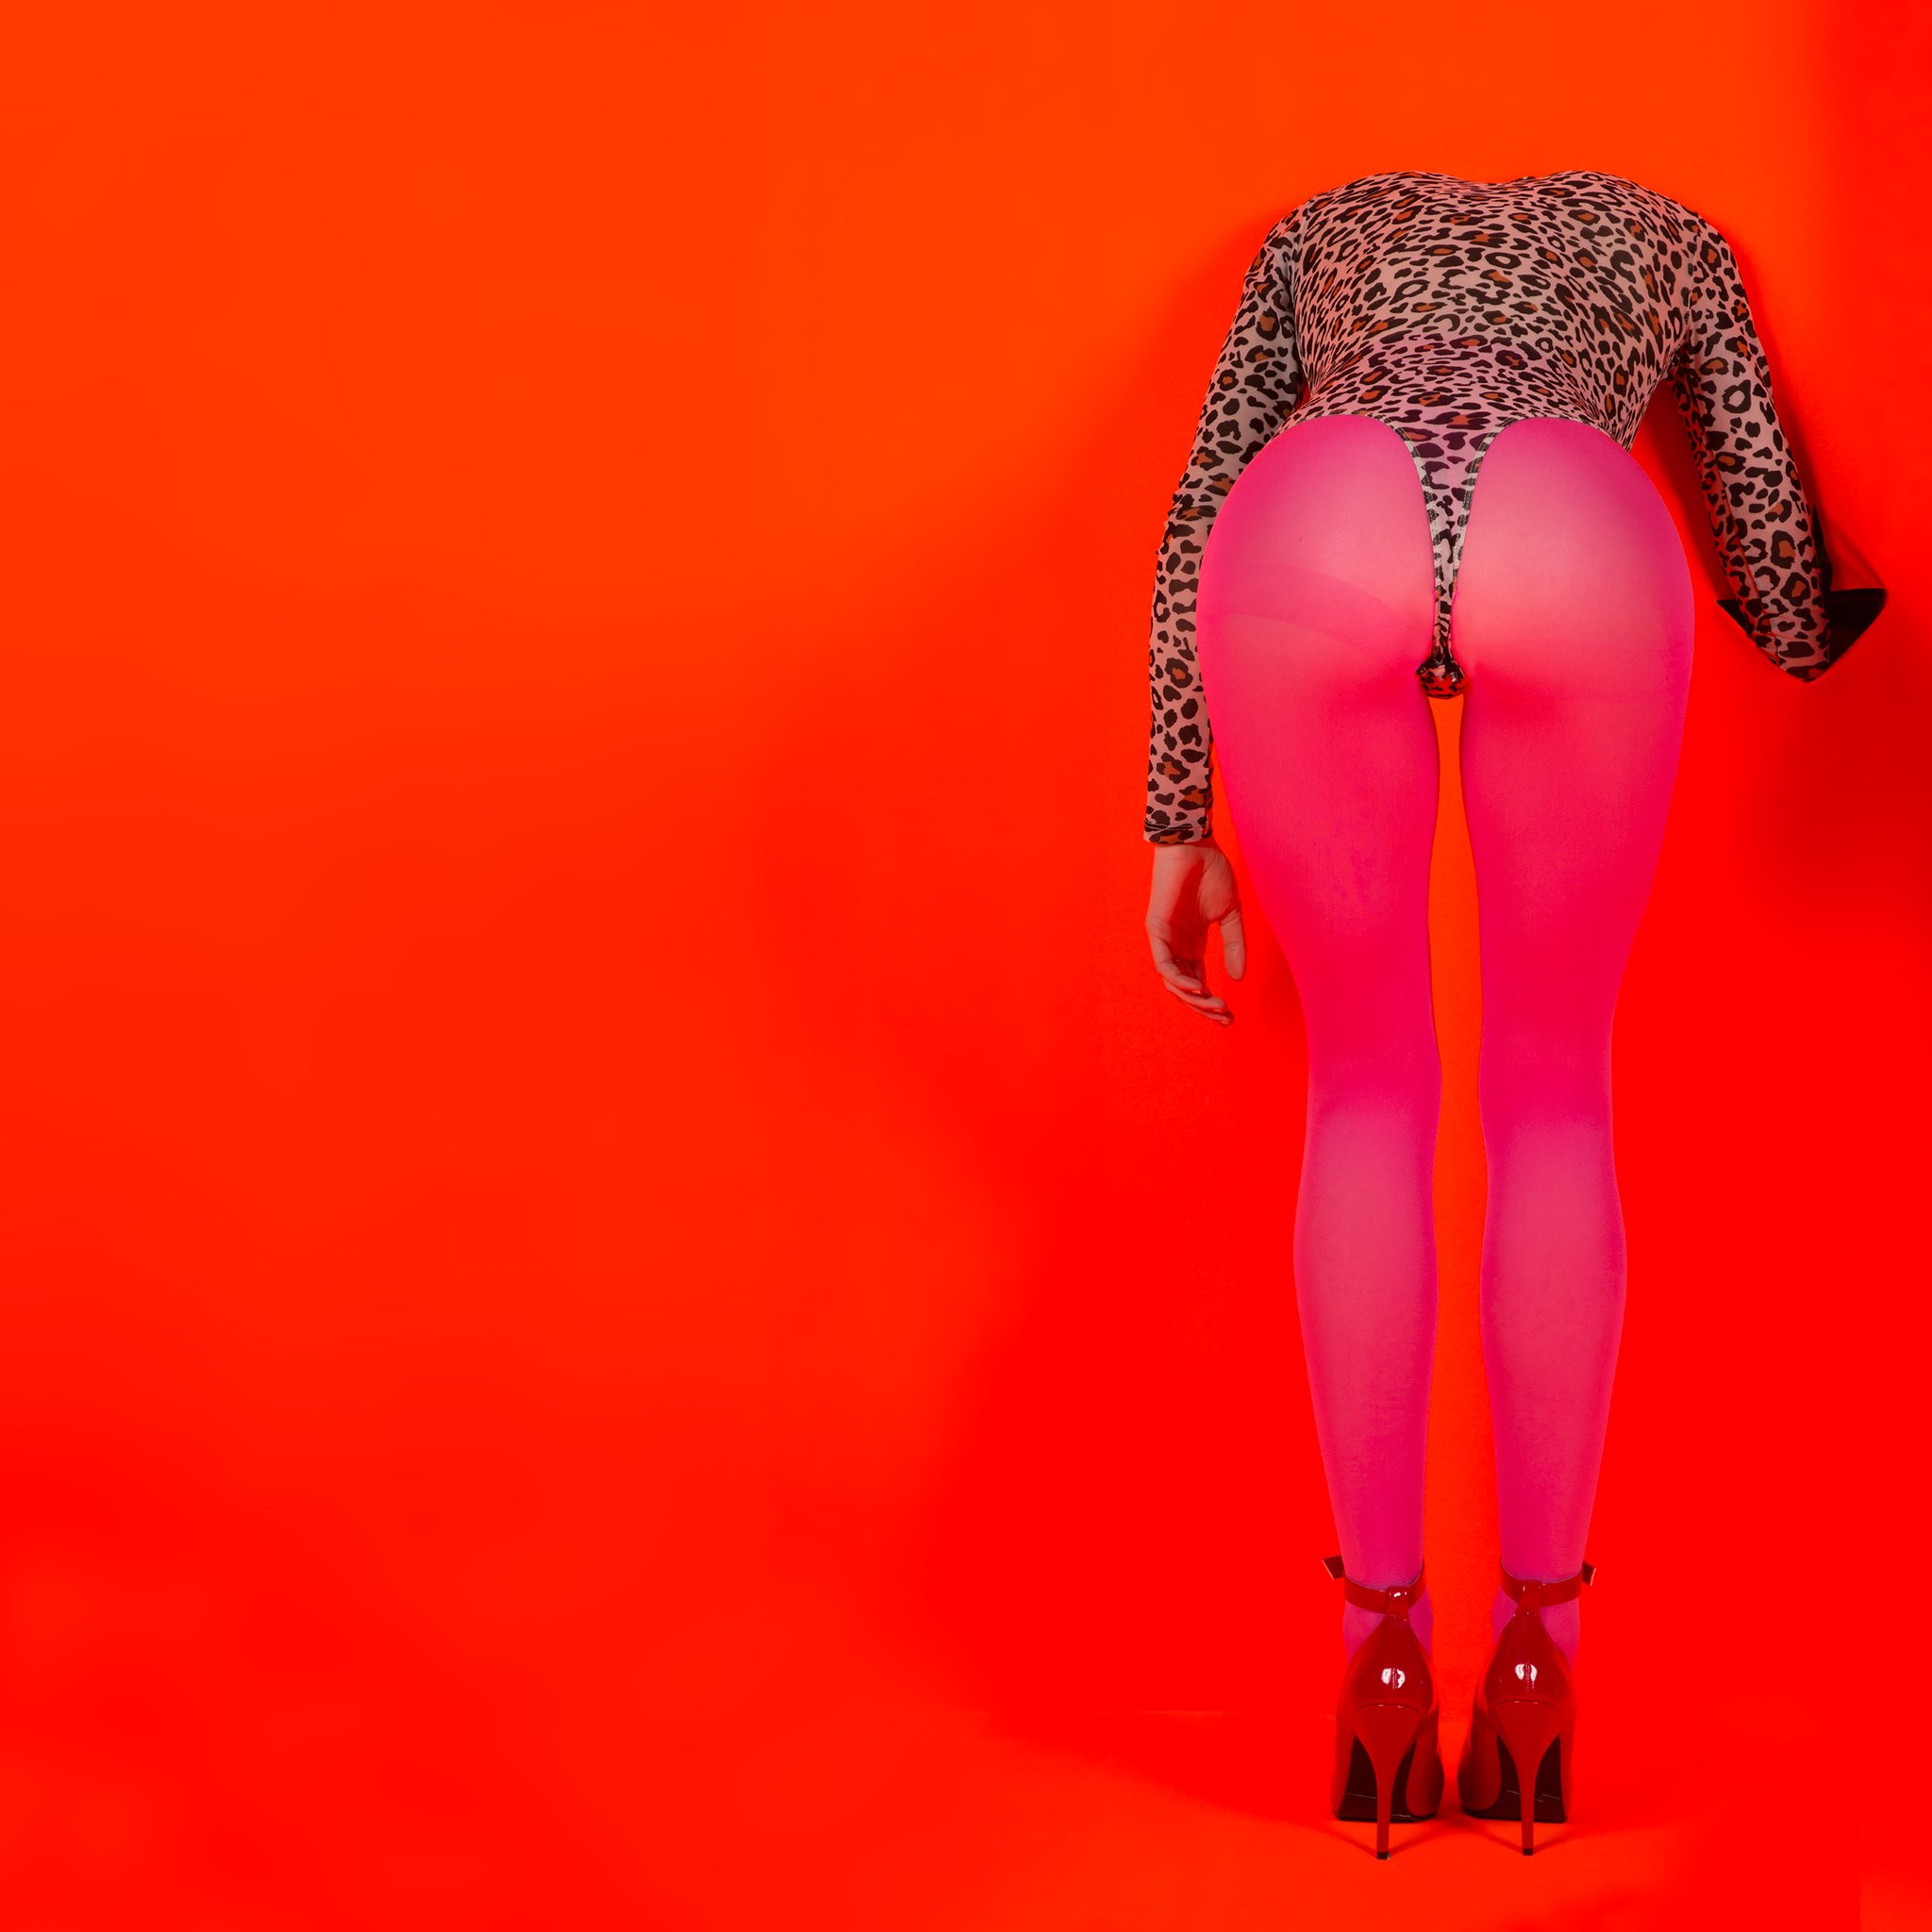 St. Vincent Announces New Album <i></noscript>MASSEDUCTION</i>, Releases “Los Ageless”” title=”st.-vincent-1504705703″ data-original-id=”256714″ data-adjusted-id=”256714″ class=”sm_size_full_width sm_alignment_center ” data-image-source=”free_stock” />
<p><strong>St. Vincent<em>, MASSEDUCTION </em>track list<br />
</strong>1. “Hang on Me”<br />
2. “Pills”<br />
3. “Masseduction”<br />
4. “Sugarboy”<br />
5. “Los Ageless”<br />
6. “Happy Birthday, Johnny”<br />
7. “Savior”<br />
8. “New York”<br />
9. “Fear The Future”<br />
10. “Young Lover”<br />
11. “Dancing with a Ghost”<br />
12. “Slow Disco”<br />
13. “Smoking Section”</p>
</p> </div>
</div>
</div>
</div>
</div>
</div>
</div>
</section>
<section data-particle_enable=